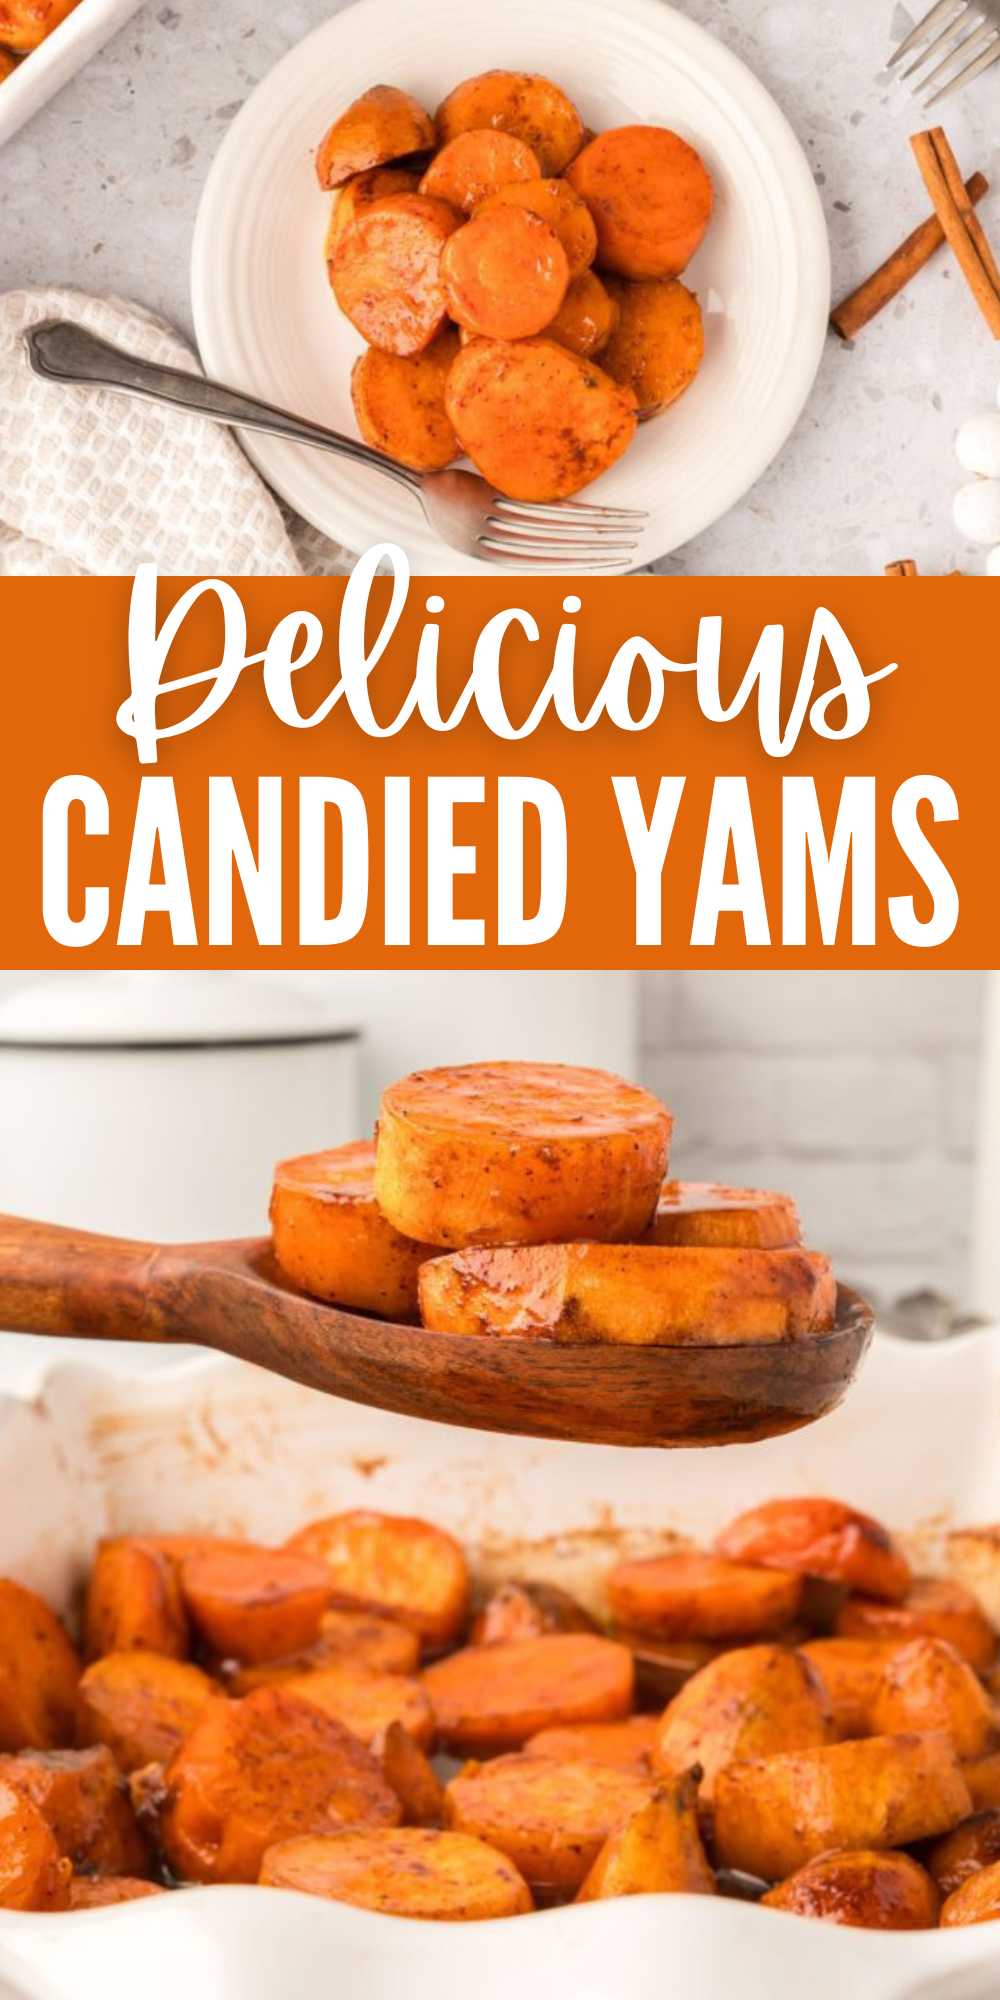 Candied Yams Recipe is the perfect side dish to serve this Thanksgiving and Christmas. The buttery sauce makes these yams so delicious. You will be amazed how delicious these yams are. You can even top them with mini marshmallows for an extra treat. These fork-tender sweet potatoes are always a crowd favorite and a great addition to sunday dinner. #eatingonadime #candiedyams #yams #sidedish